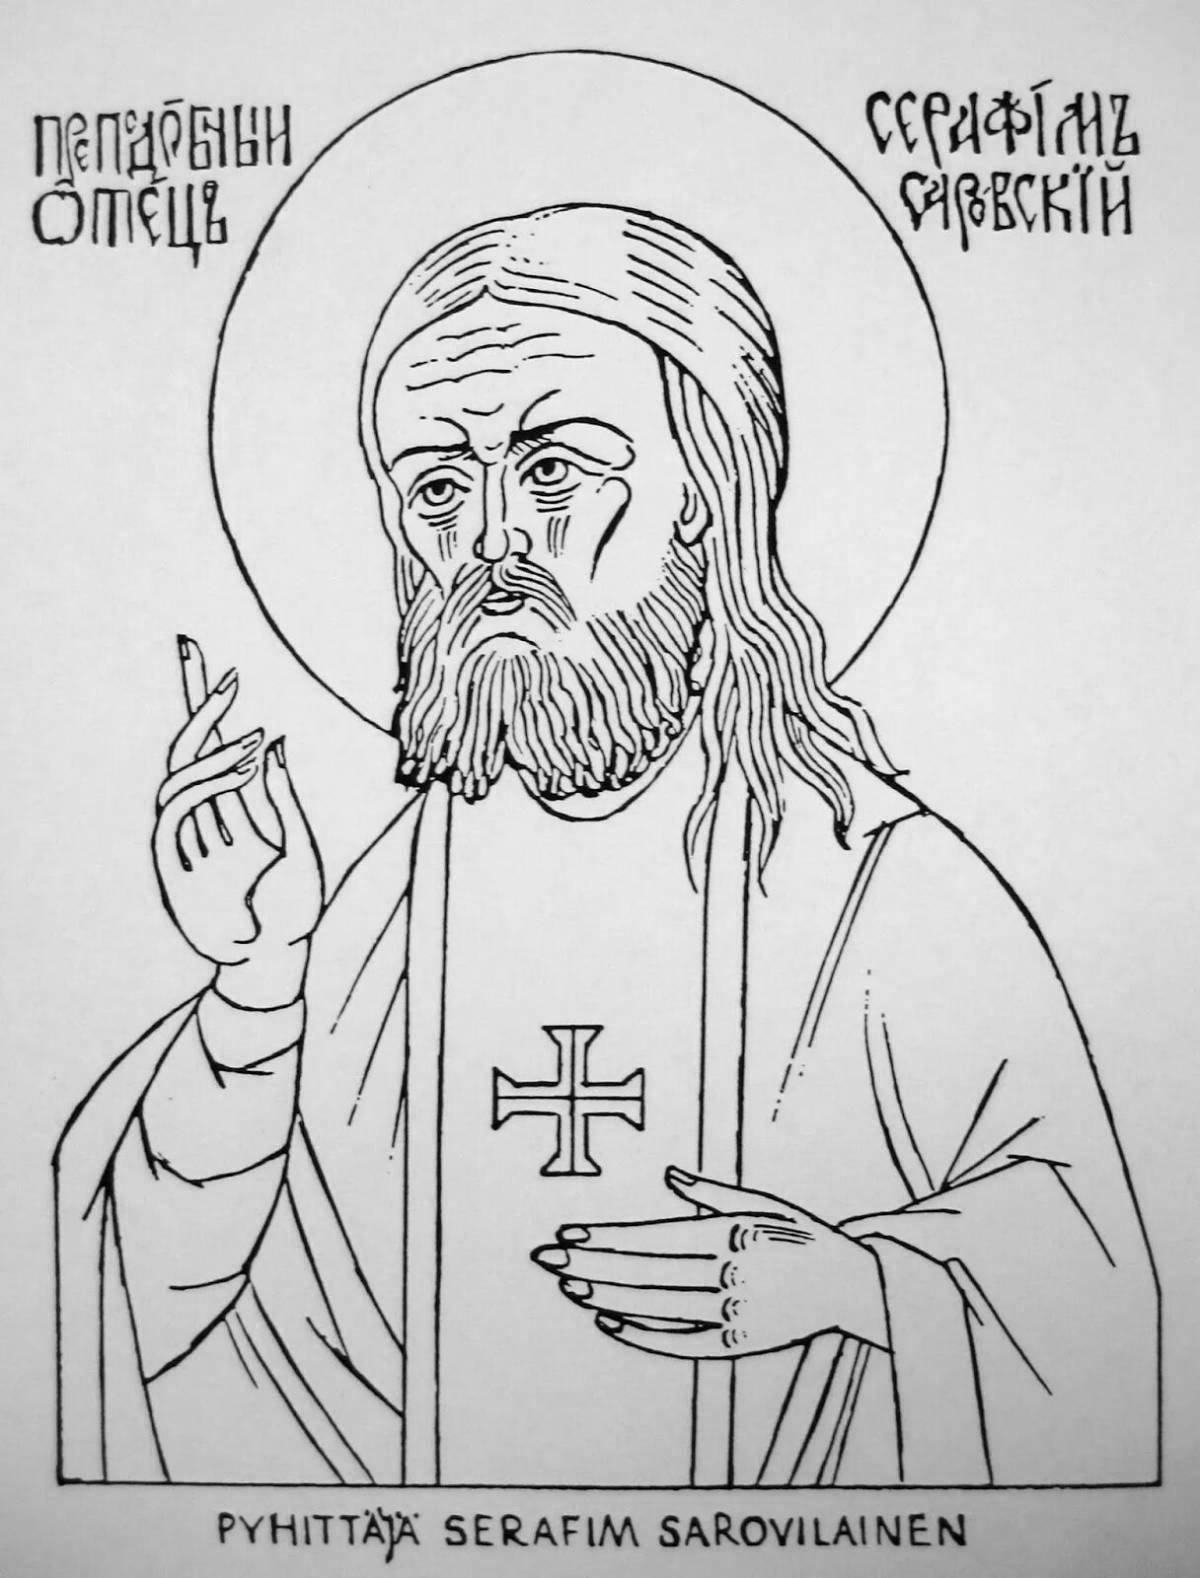 Coloring page Sergius of Radonezh with a colorful inscription